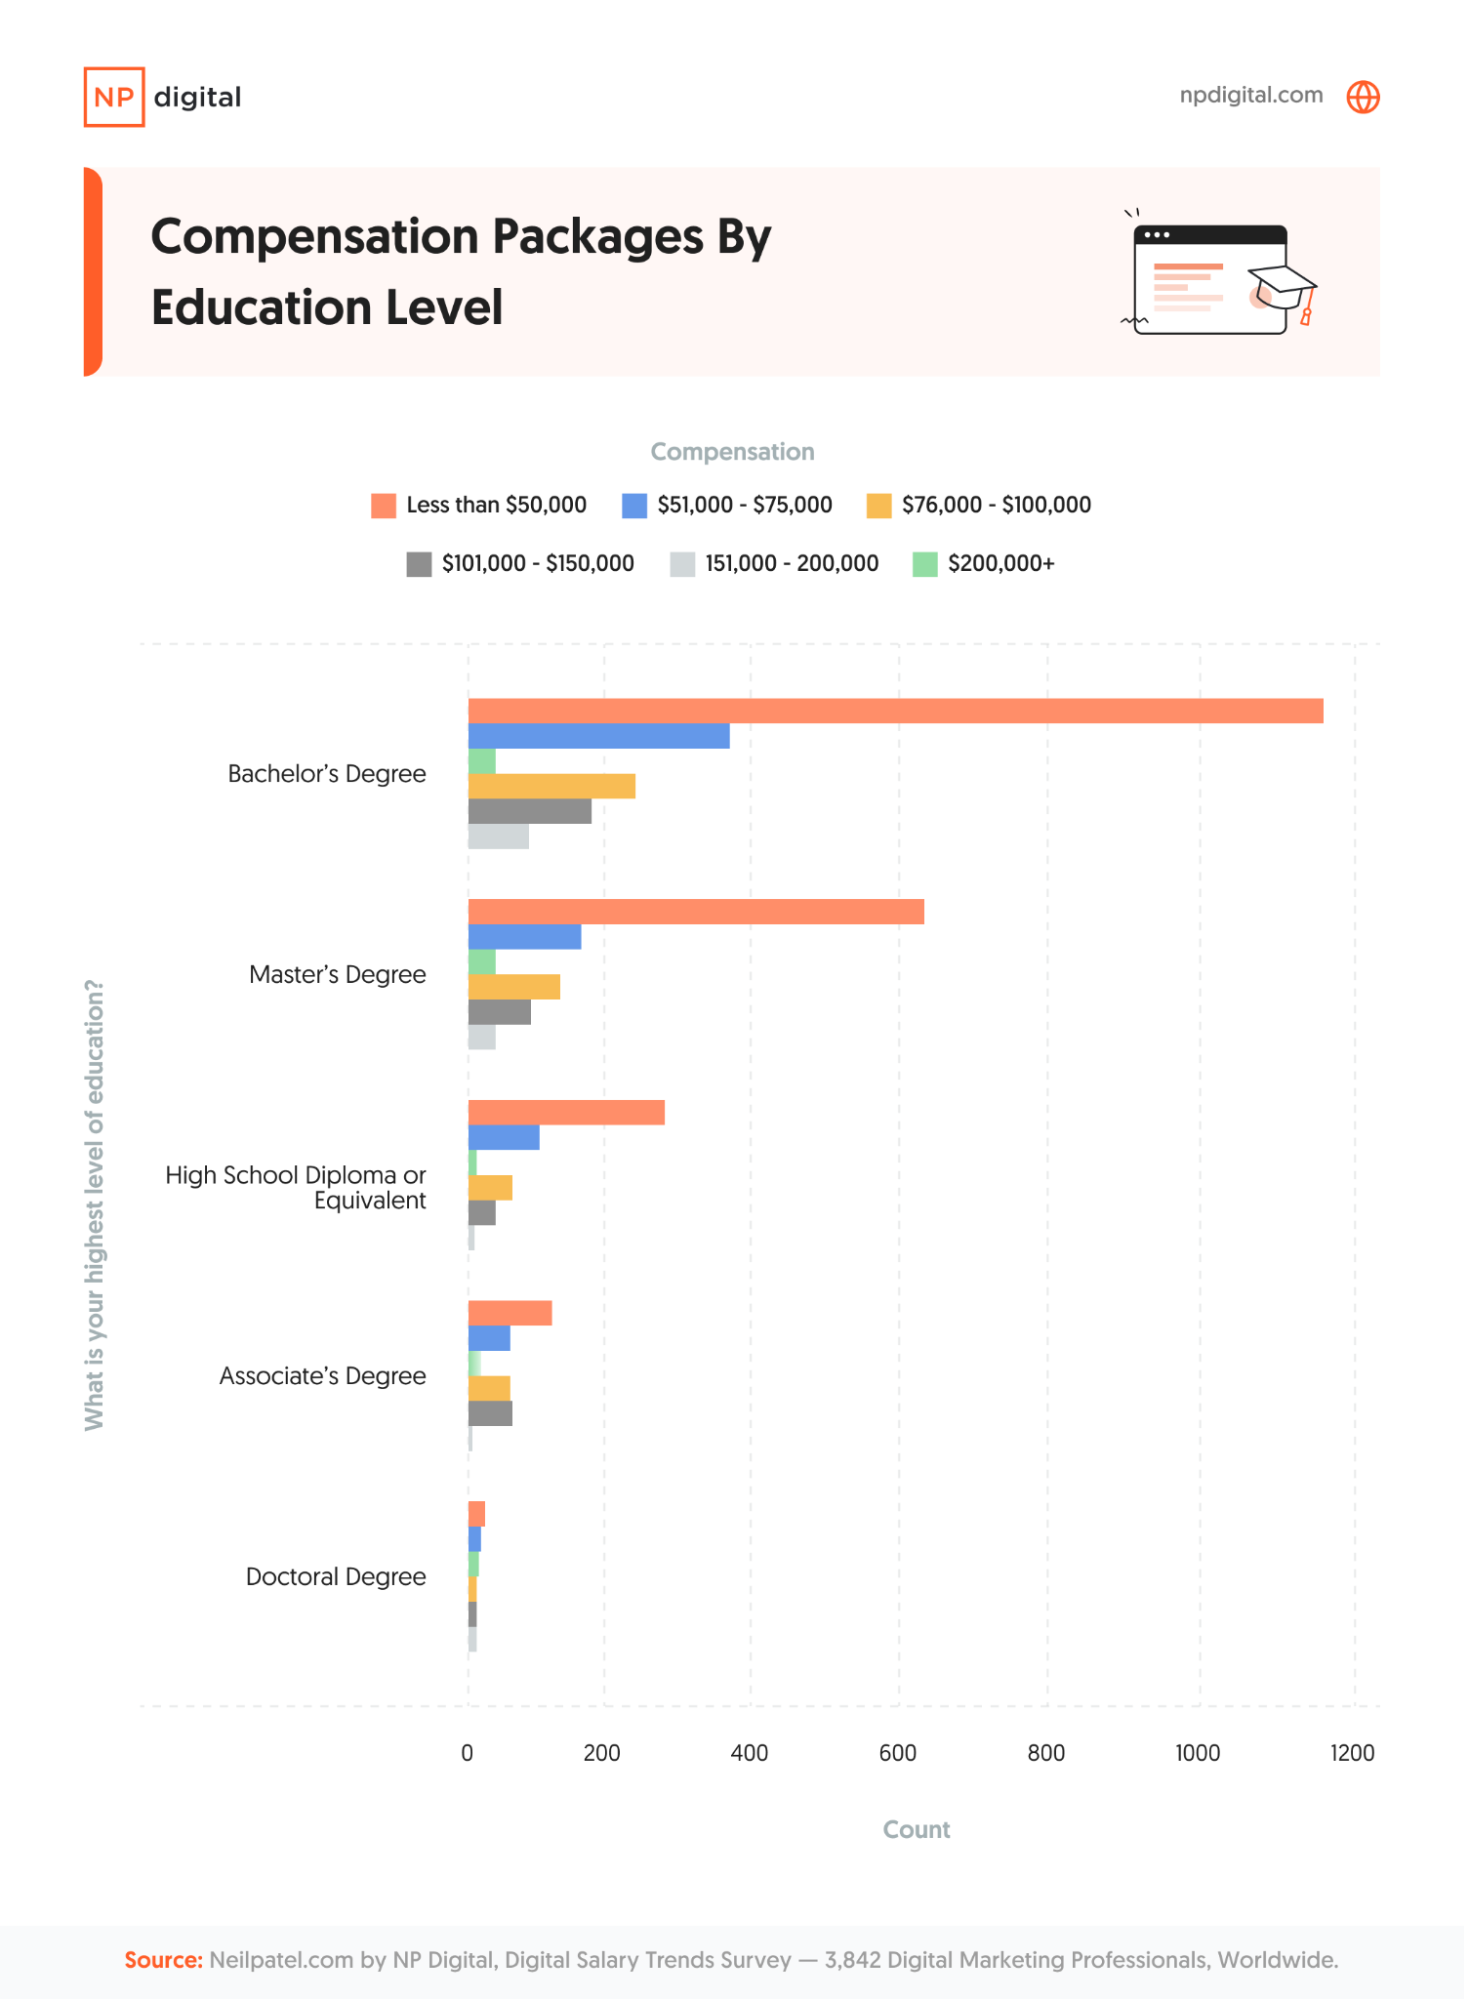 Bar chart showing compensation by education level